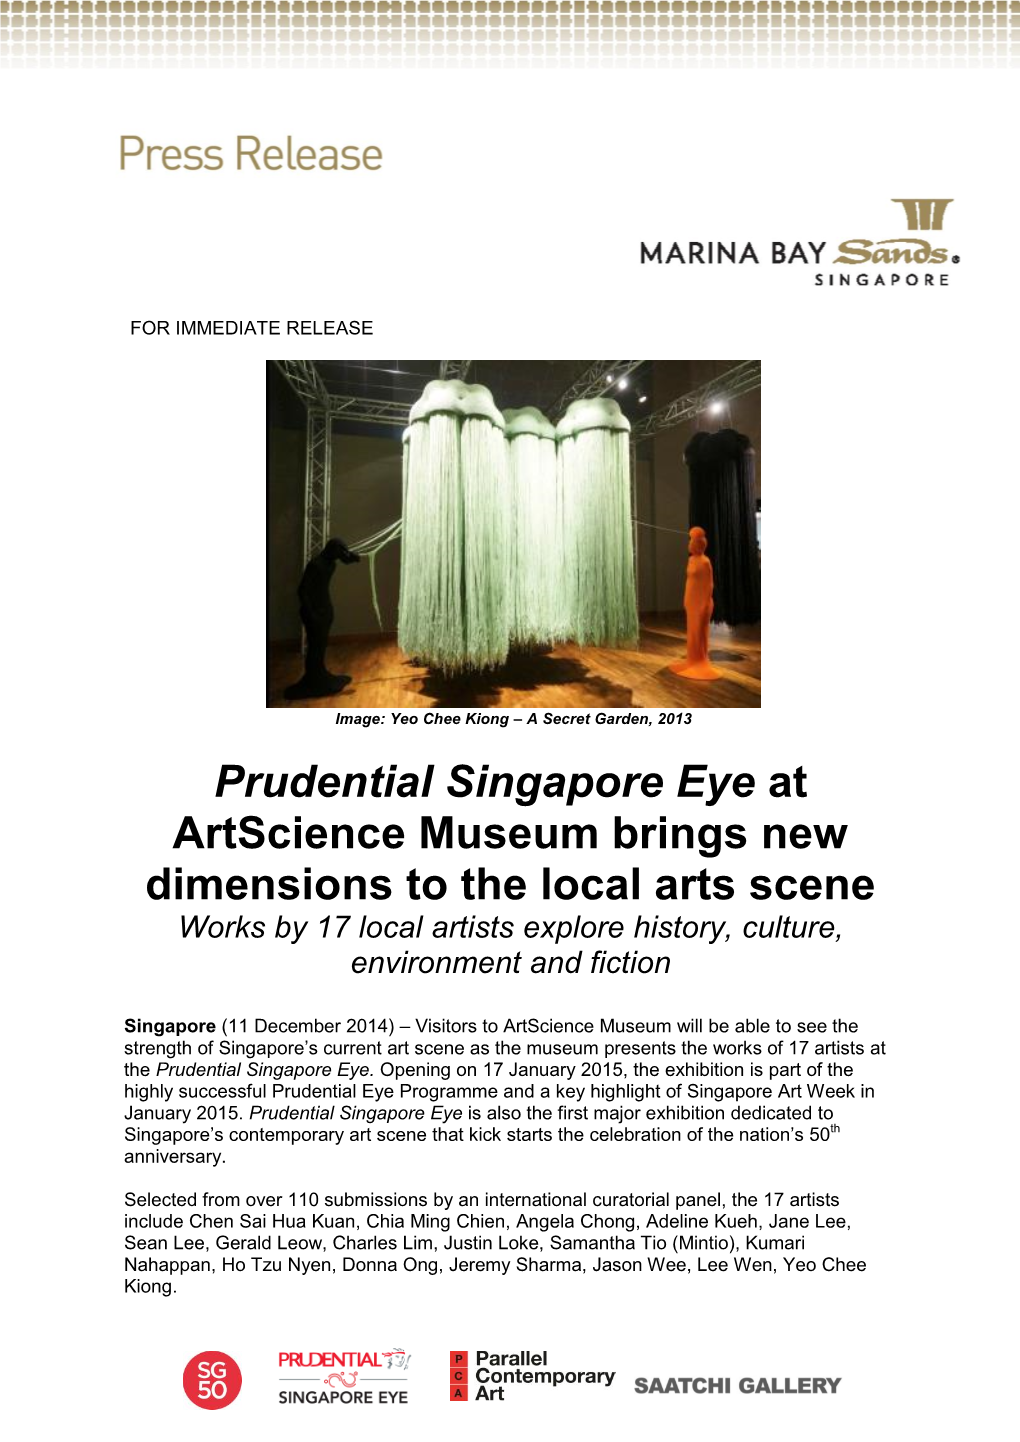 Prudential Singapore Eye at Artscience Museum Brings New Dimensions to the Local Arts Scene